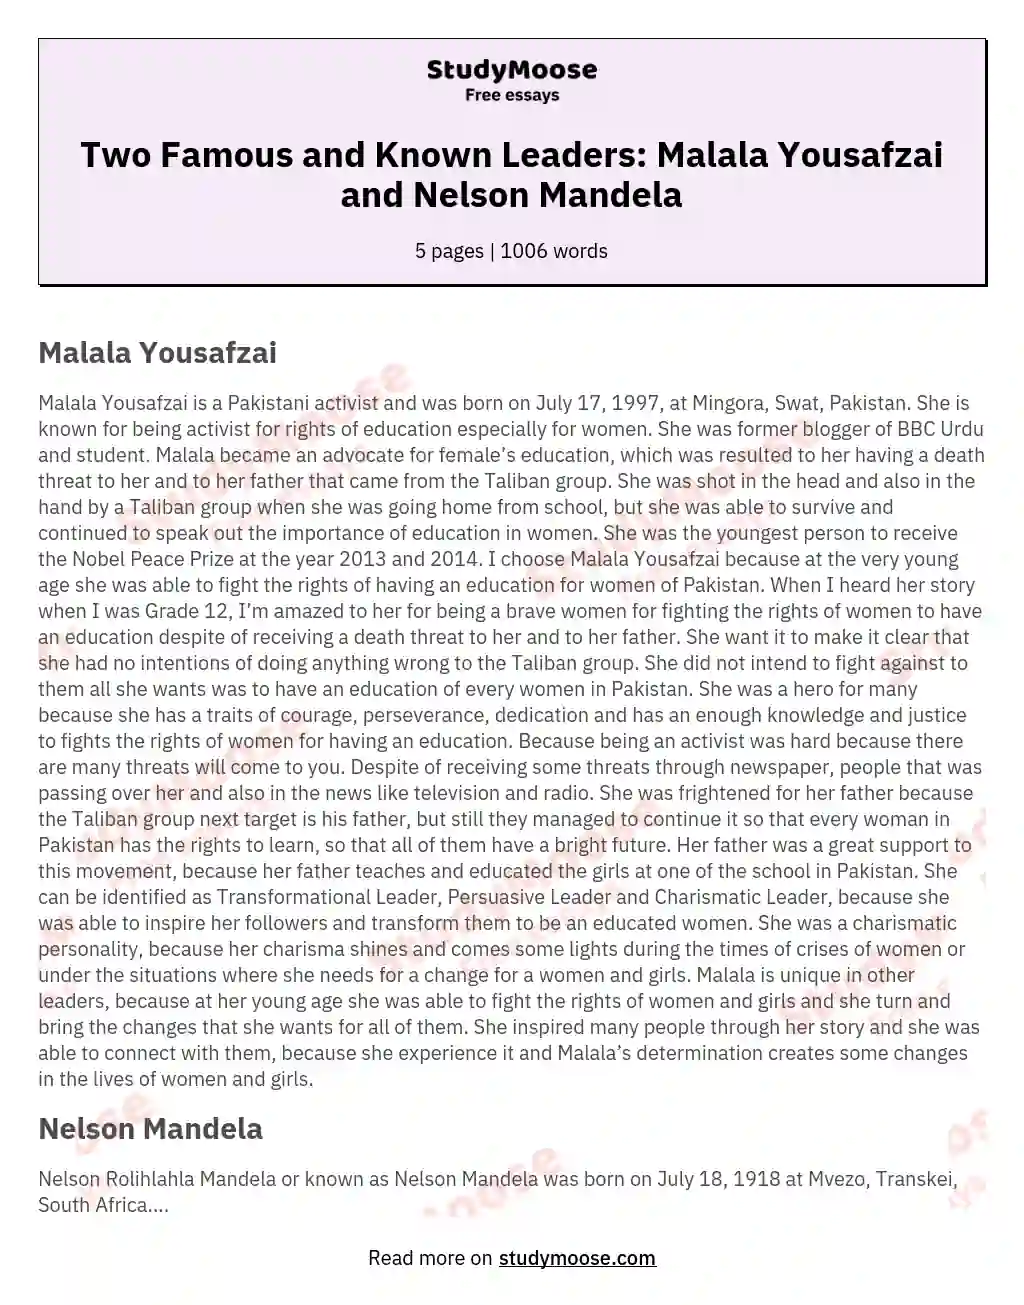 Two Famous and Known Leaders: Malala Yousafzai and Nelson Mandela essay